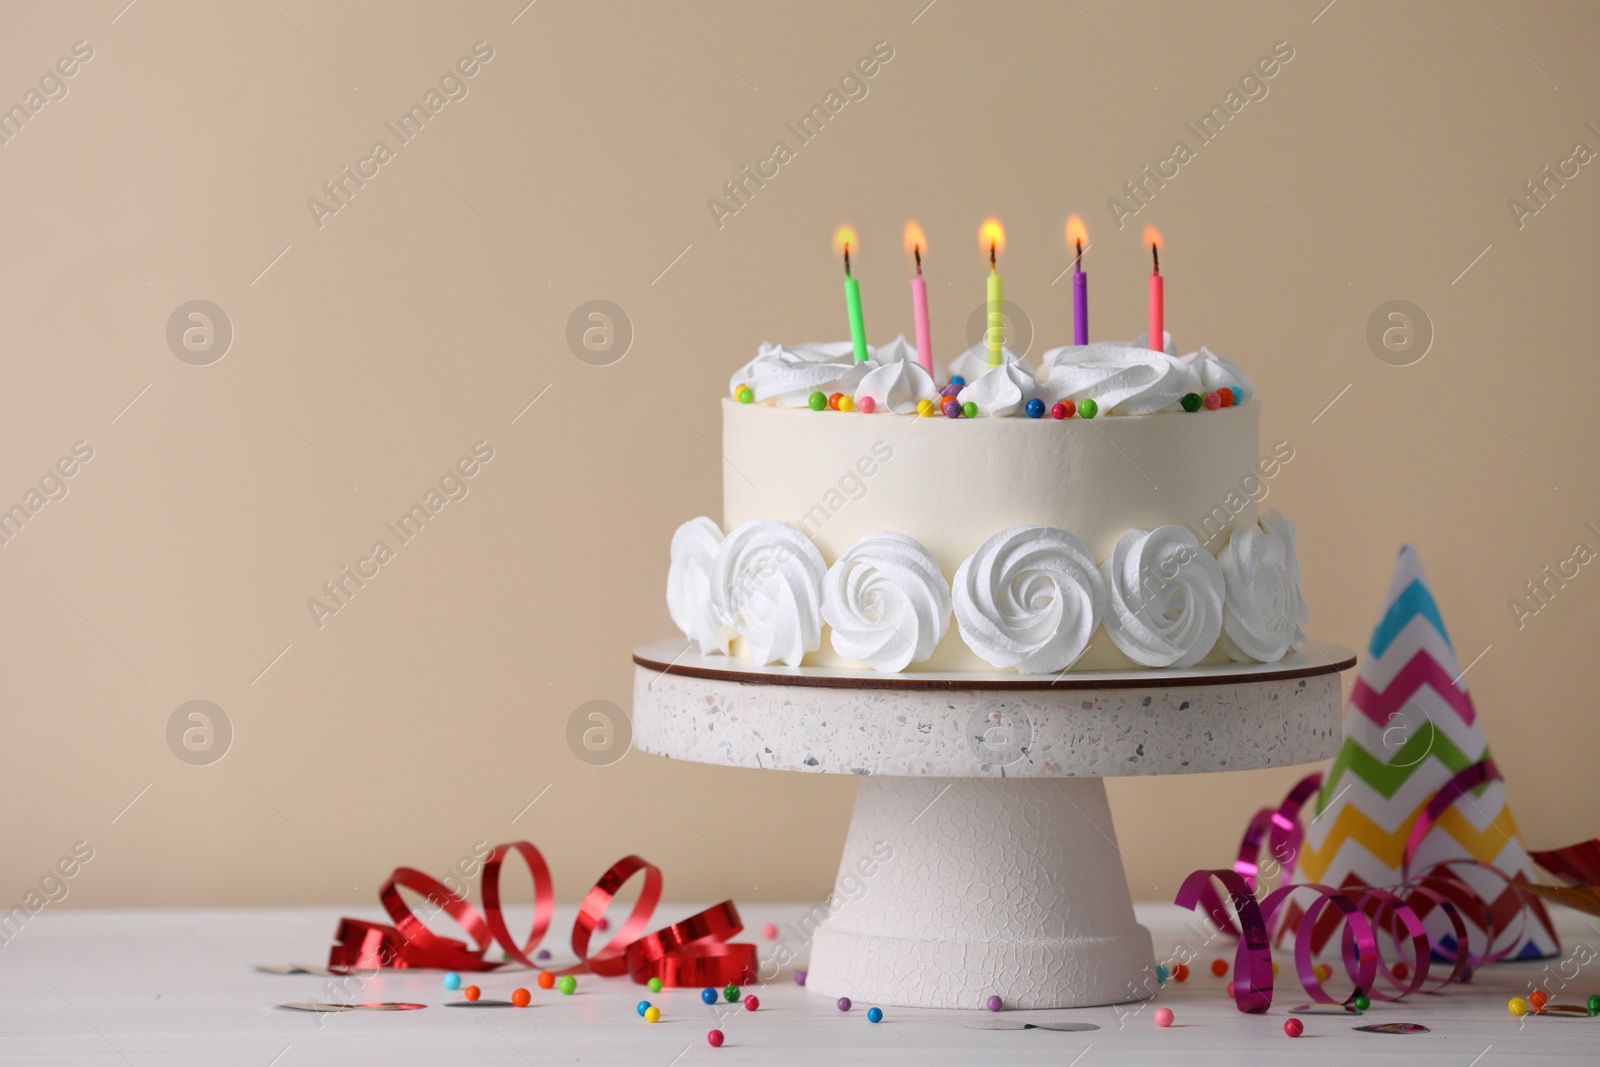 Photo of Delicious birthday cake and party decor on white wooden table against beige background, space for text